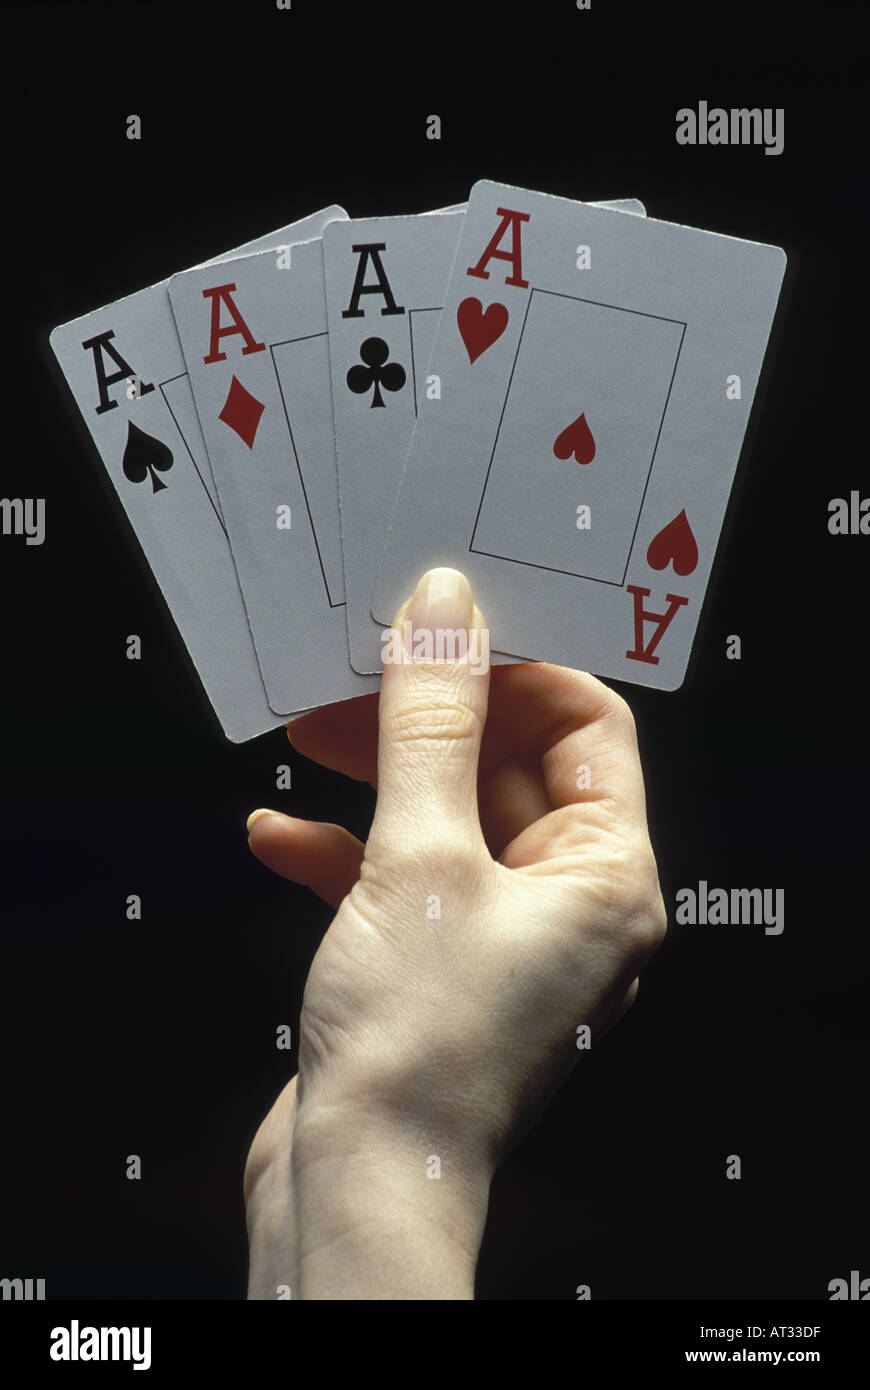 Hand holding four aces on black background Stock Photo